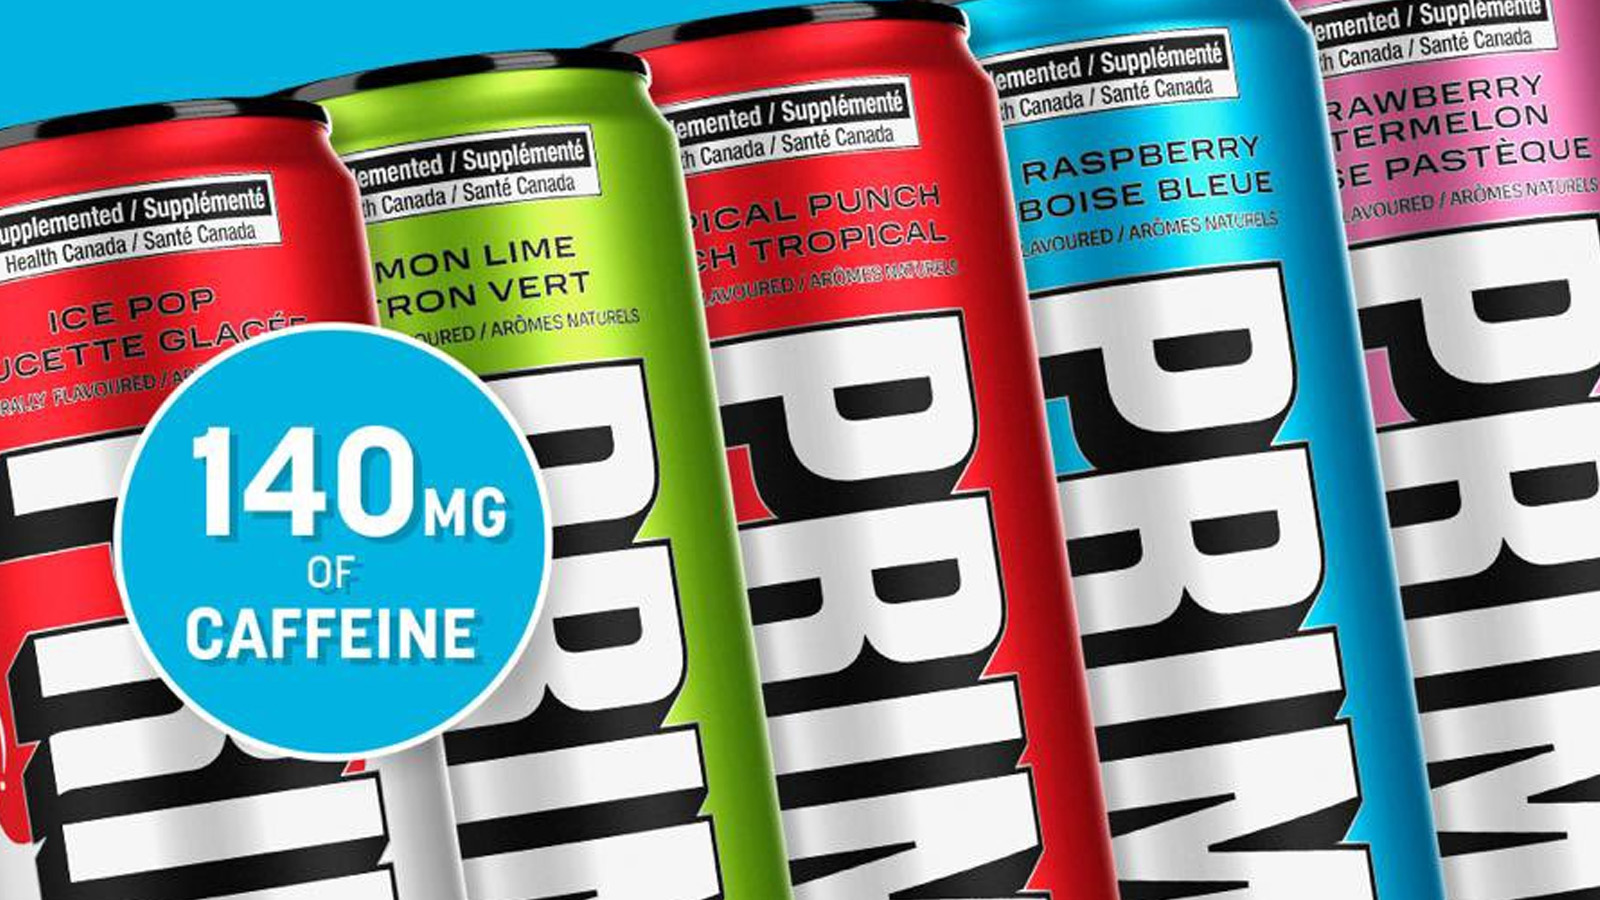 Prime Energy launches in Canada with 140mg caffeine just weeks after recall